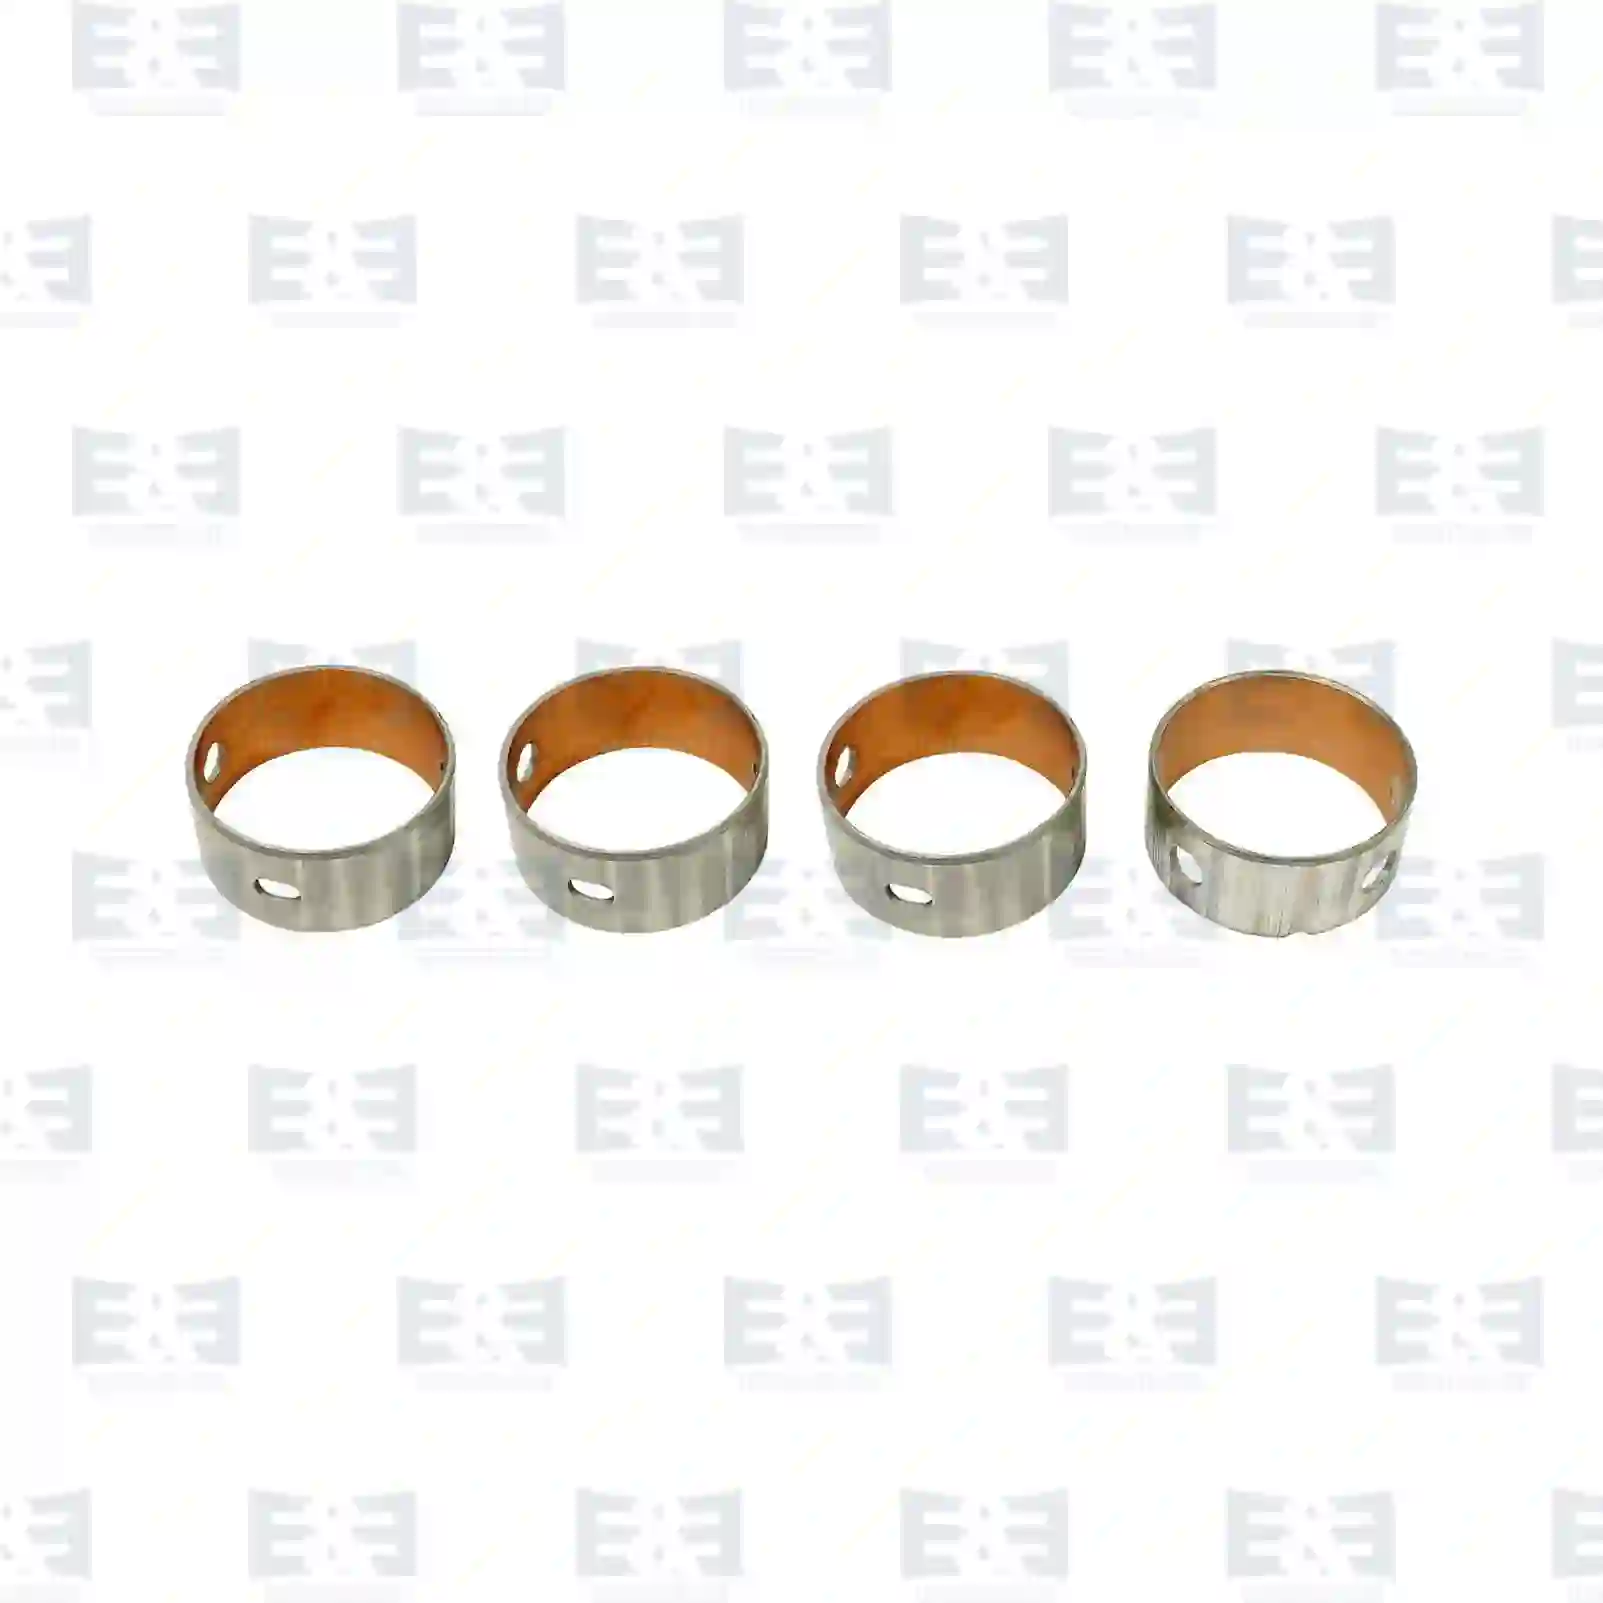  Camshaft bearing kit || E&E Truck Spare Parts | Truck Spare Parts, Auotomotive Spare Parts